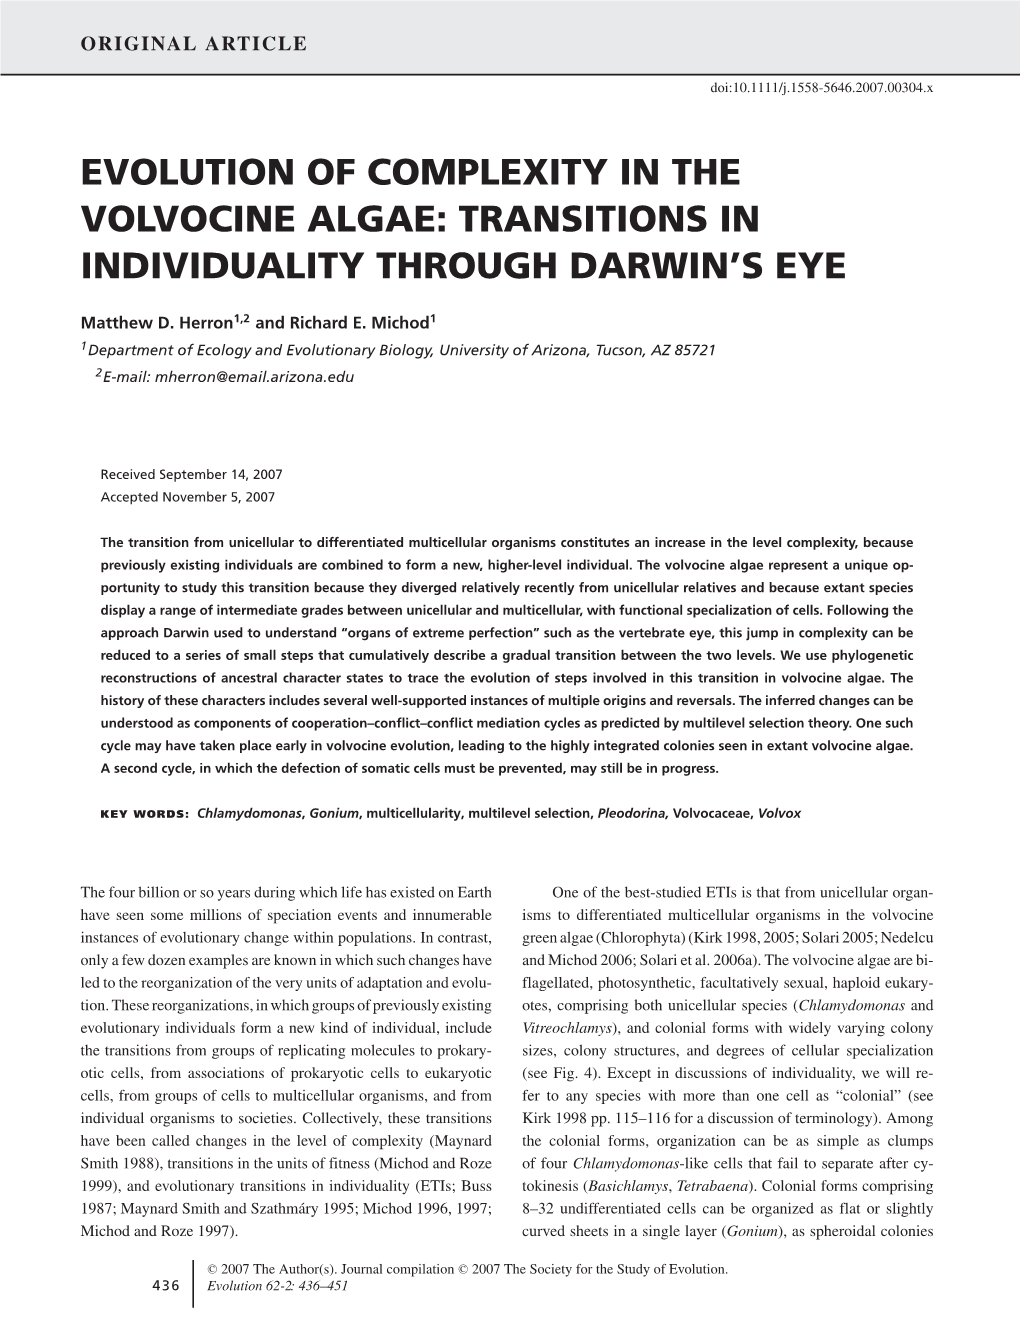 Evolution of Complexity in the Volvocine Algae: Transitions in Individuality Through Darwin’S Eye